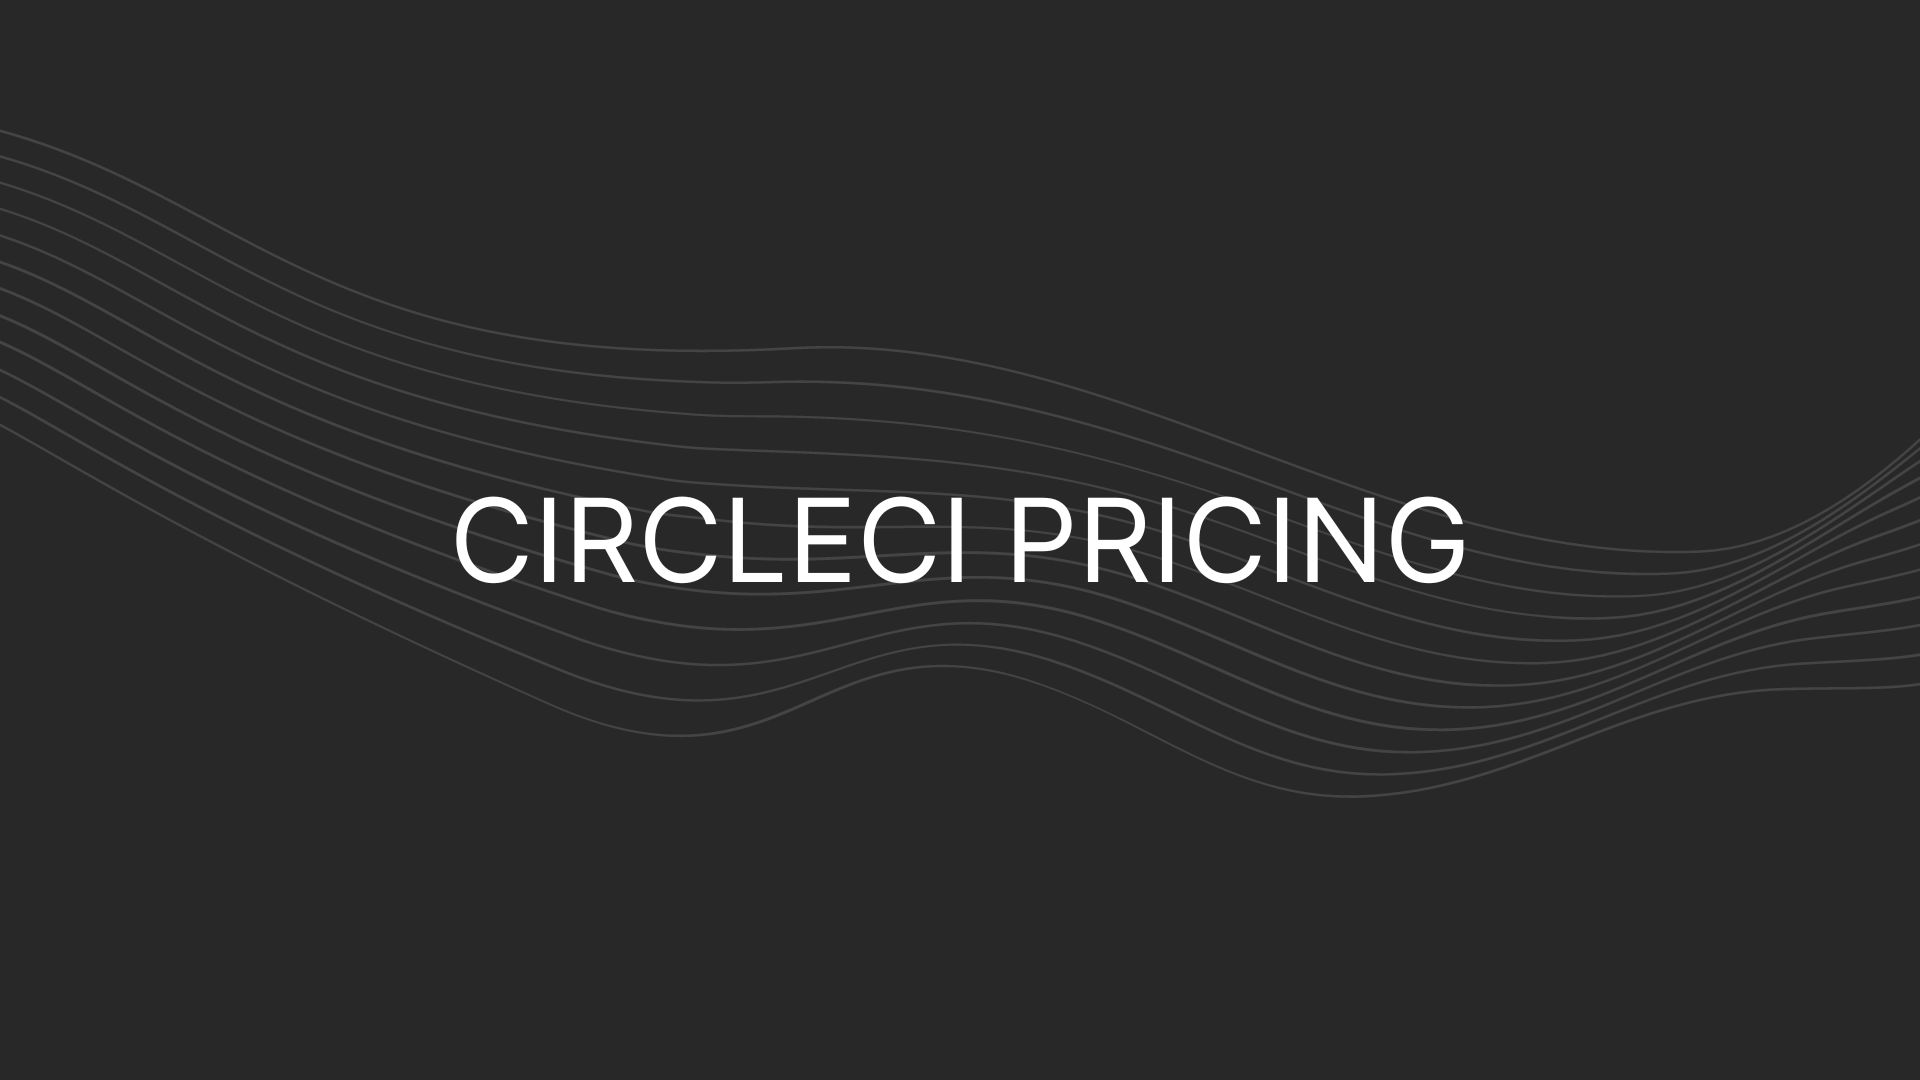 CircleCI pricing – Actual prices for all plans, including enterprise